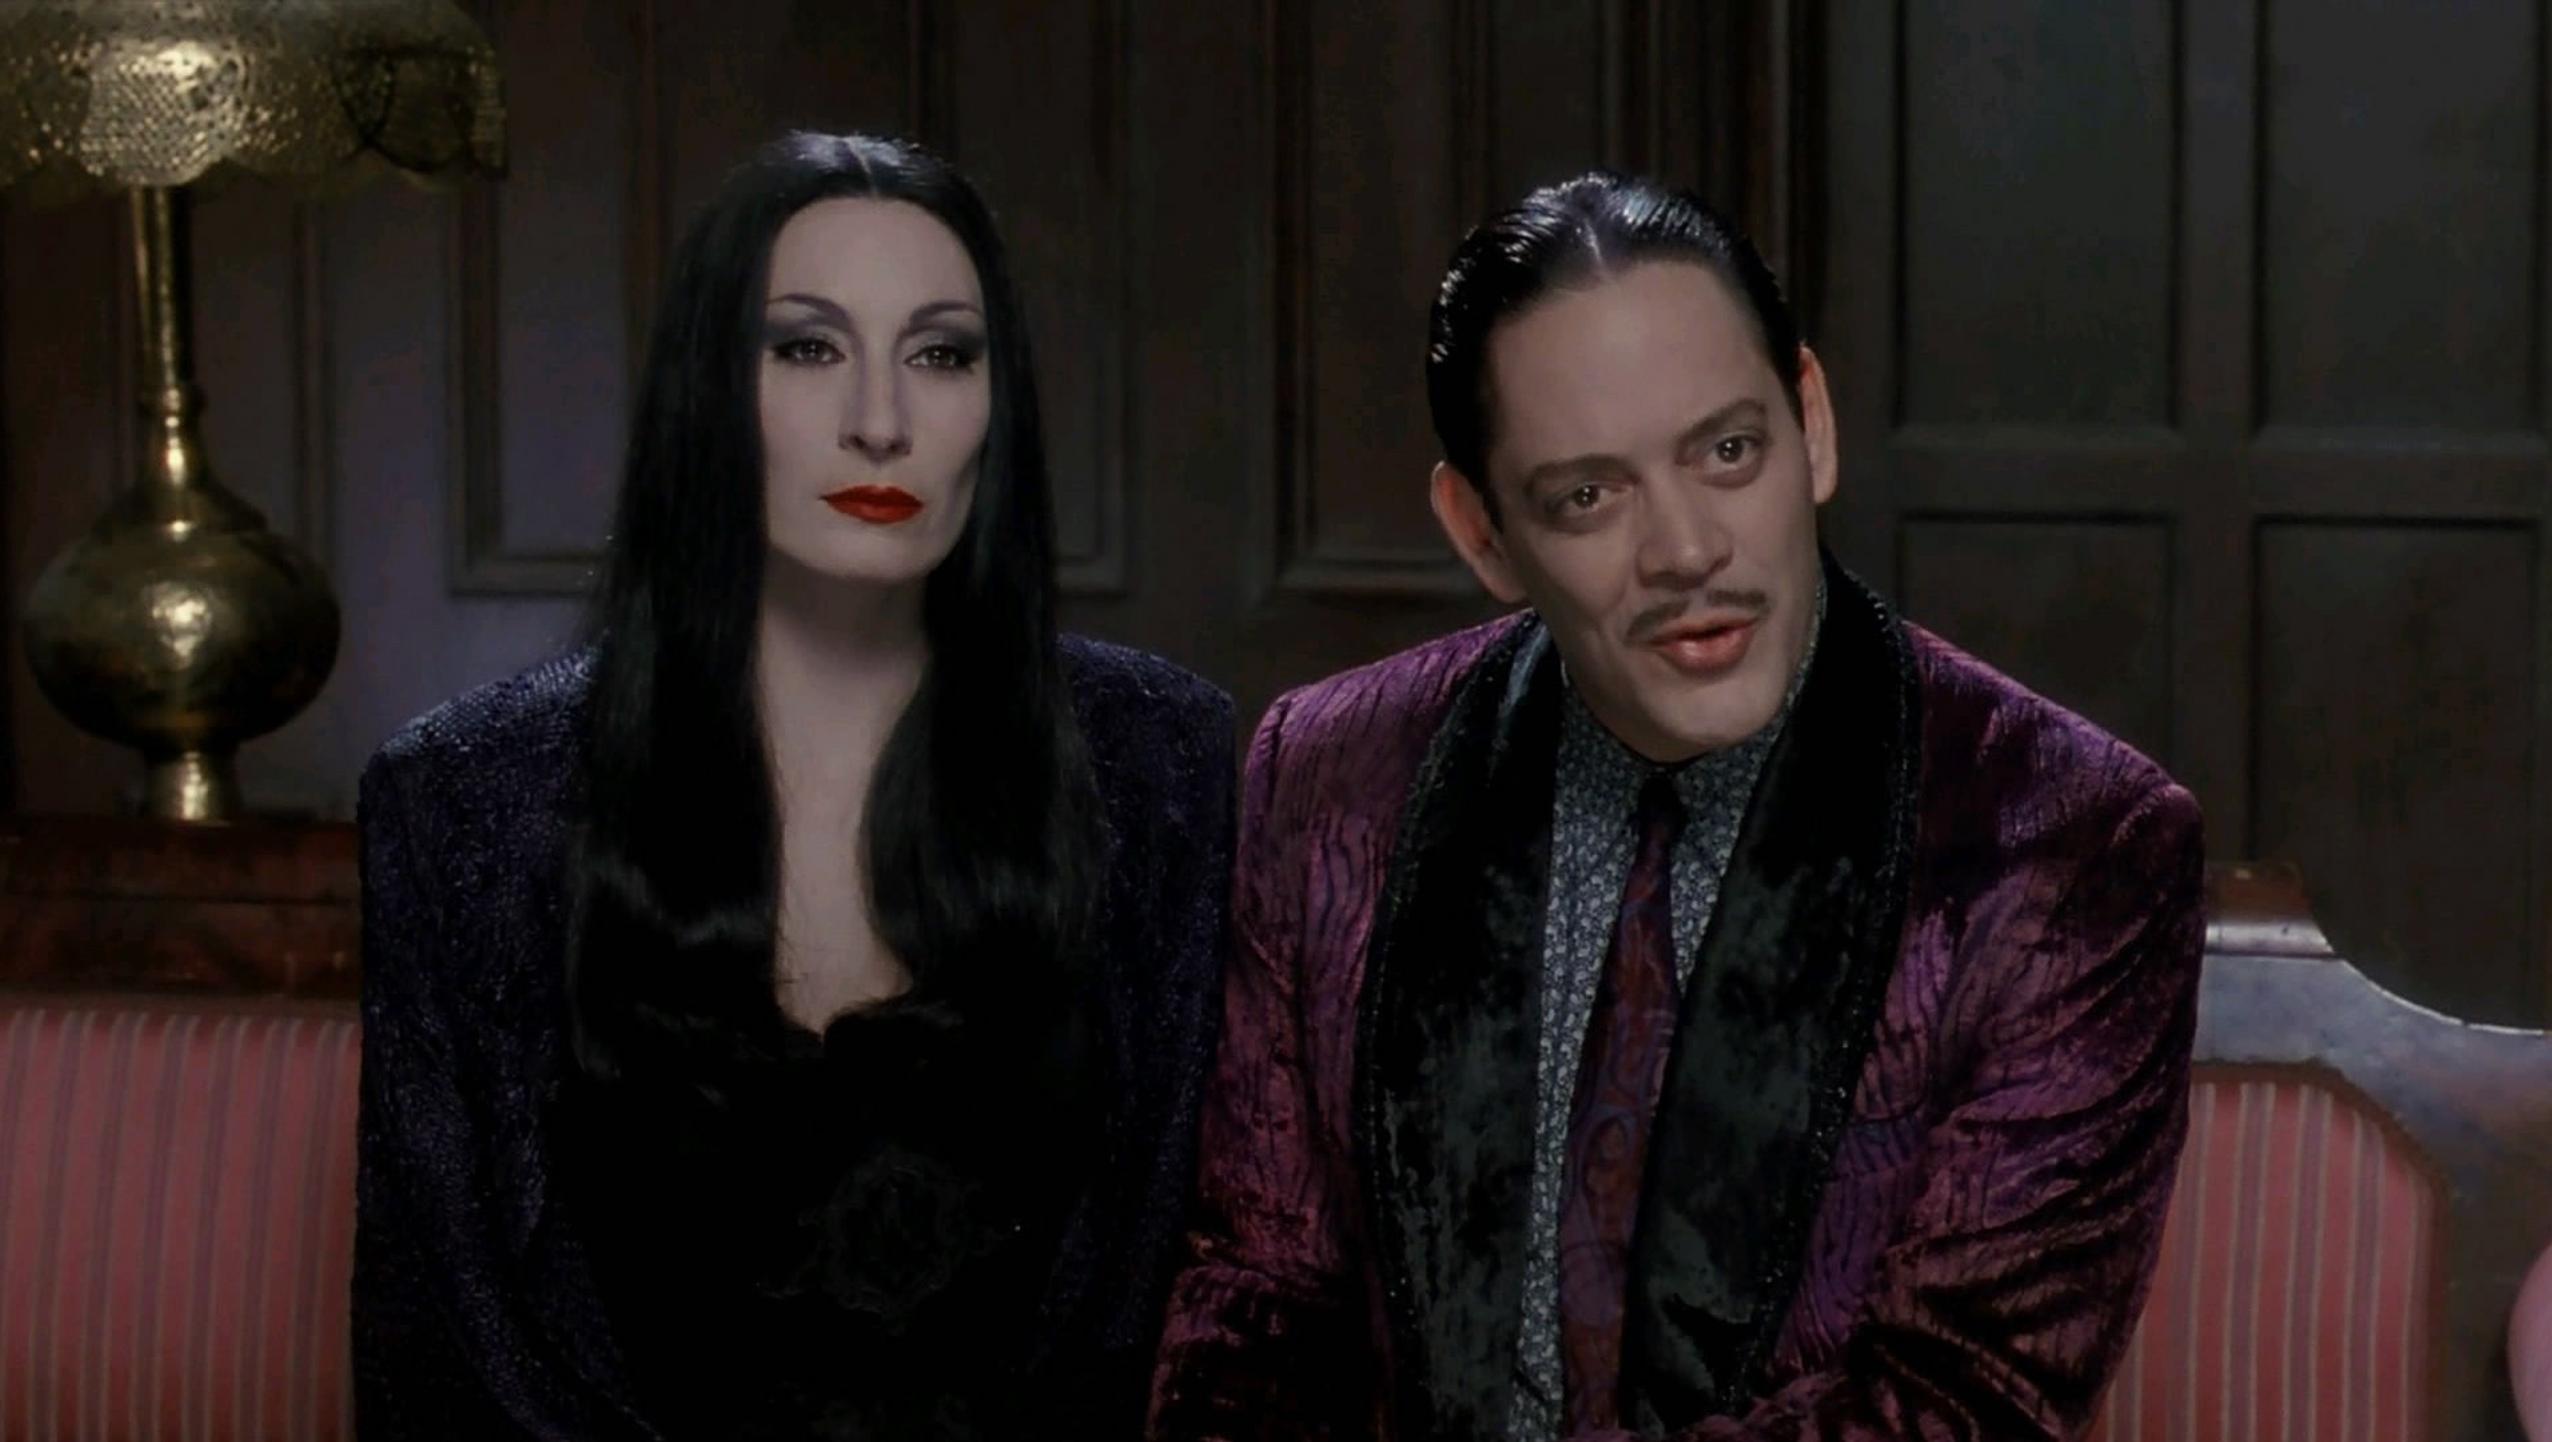 Addams Family Wallpapers - Wallpaper Cave